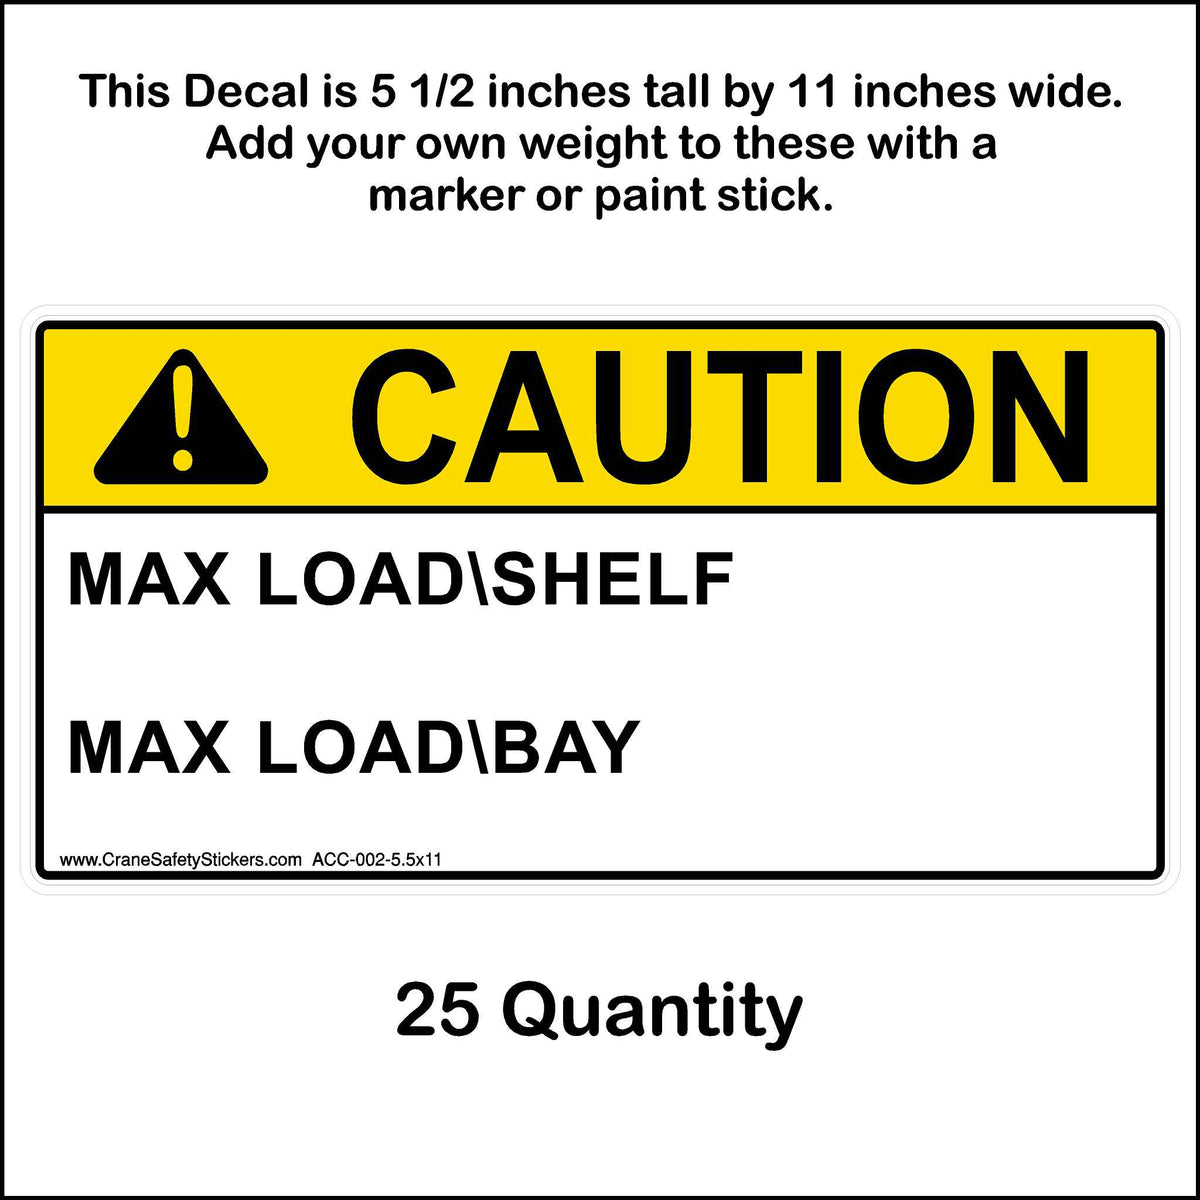 5 1/2 by 11 inch Max load shelf and max load bay sticker 25 quantity.